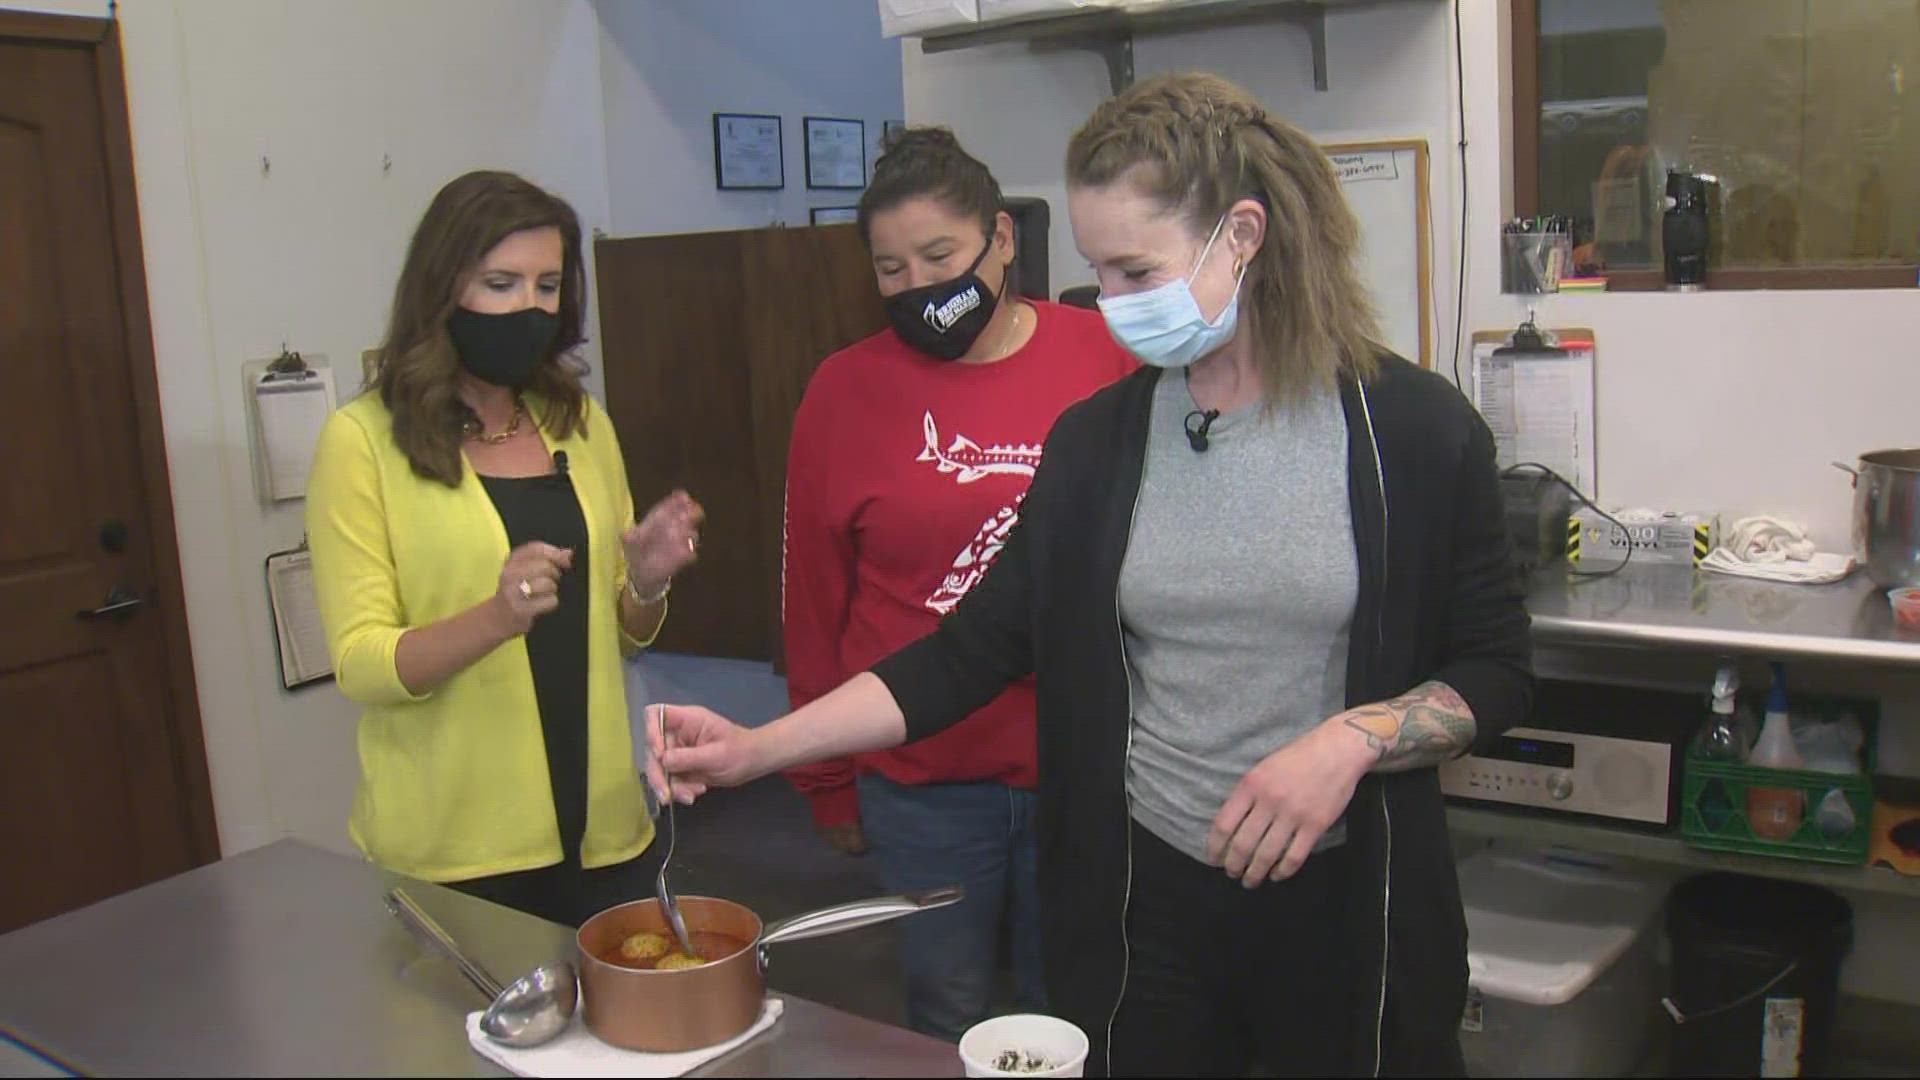 KGW's monthly series 'Oregon in Season' highlights seasonal ingredients around the state. 'Top Chef Portland' star Sara Hauman shared a salmon meatballs recipe.